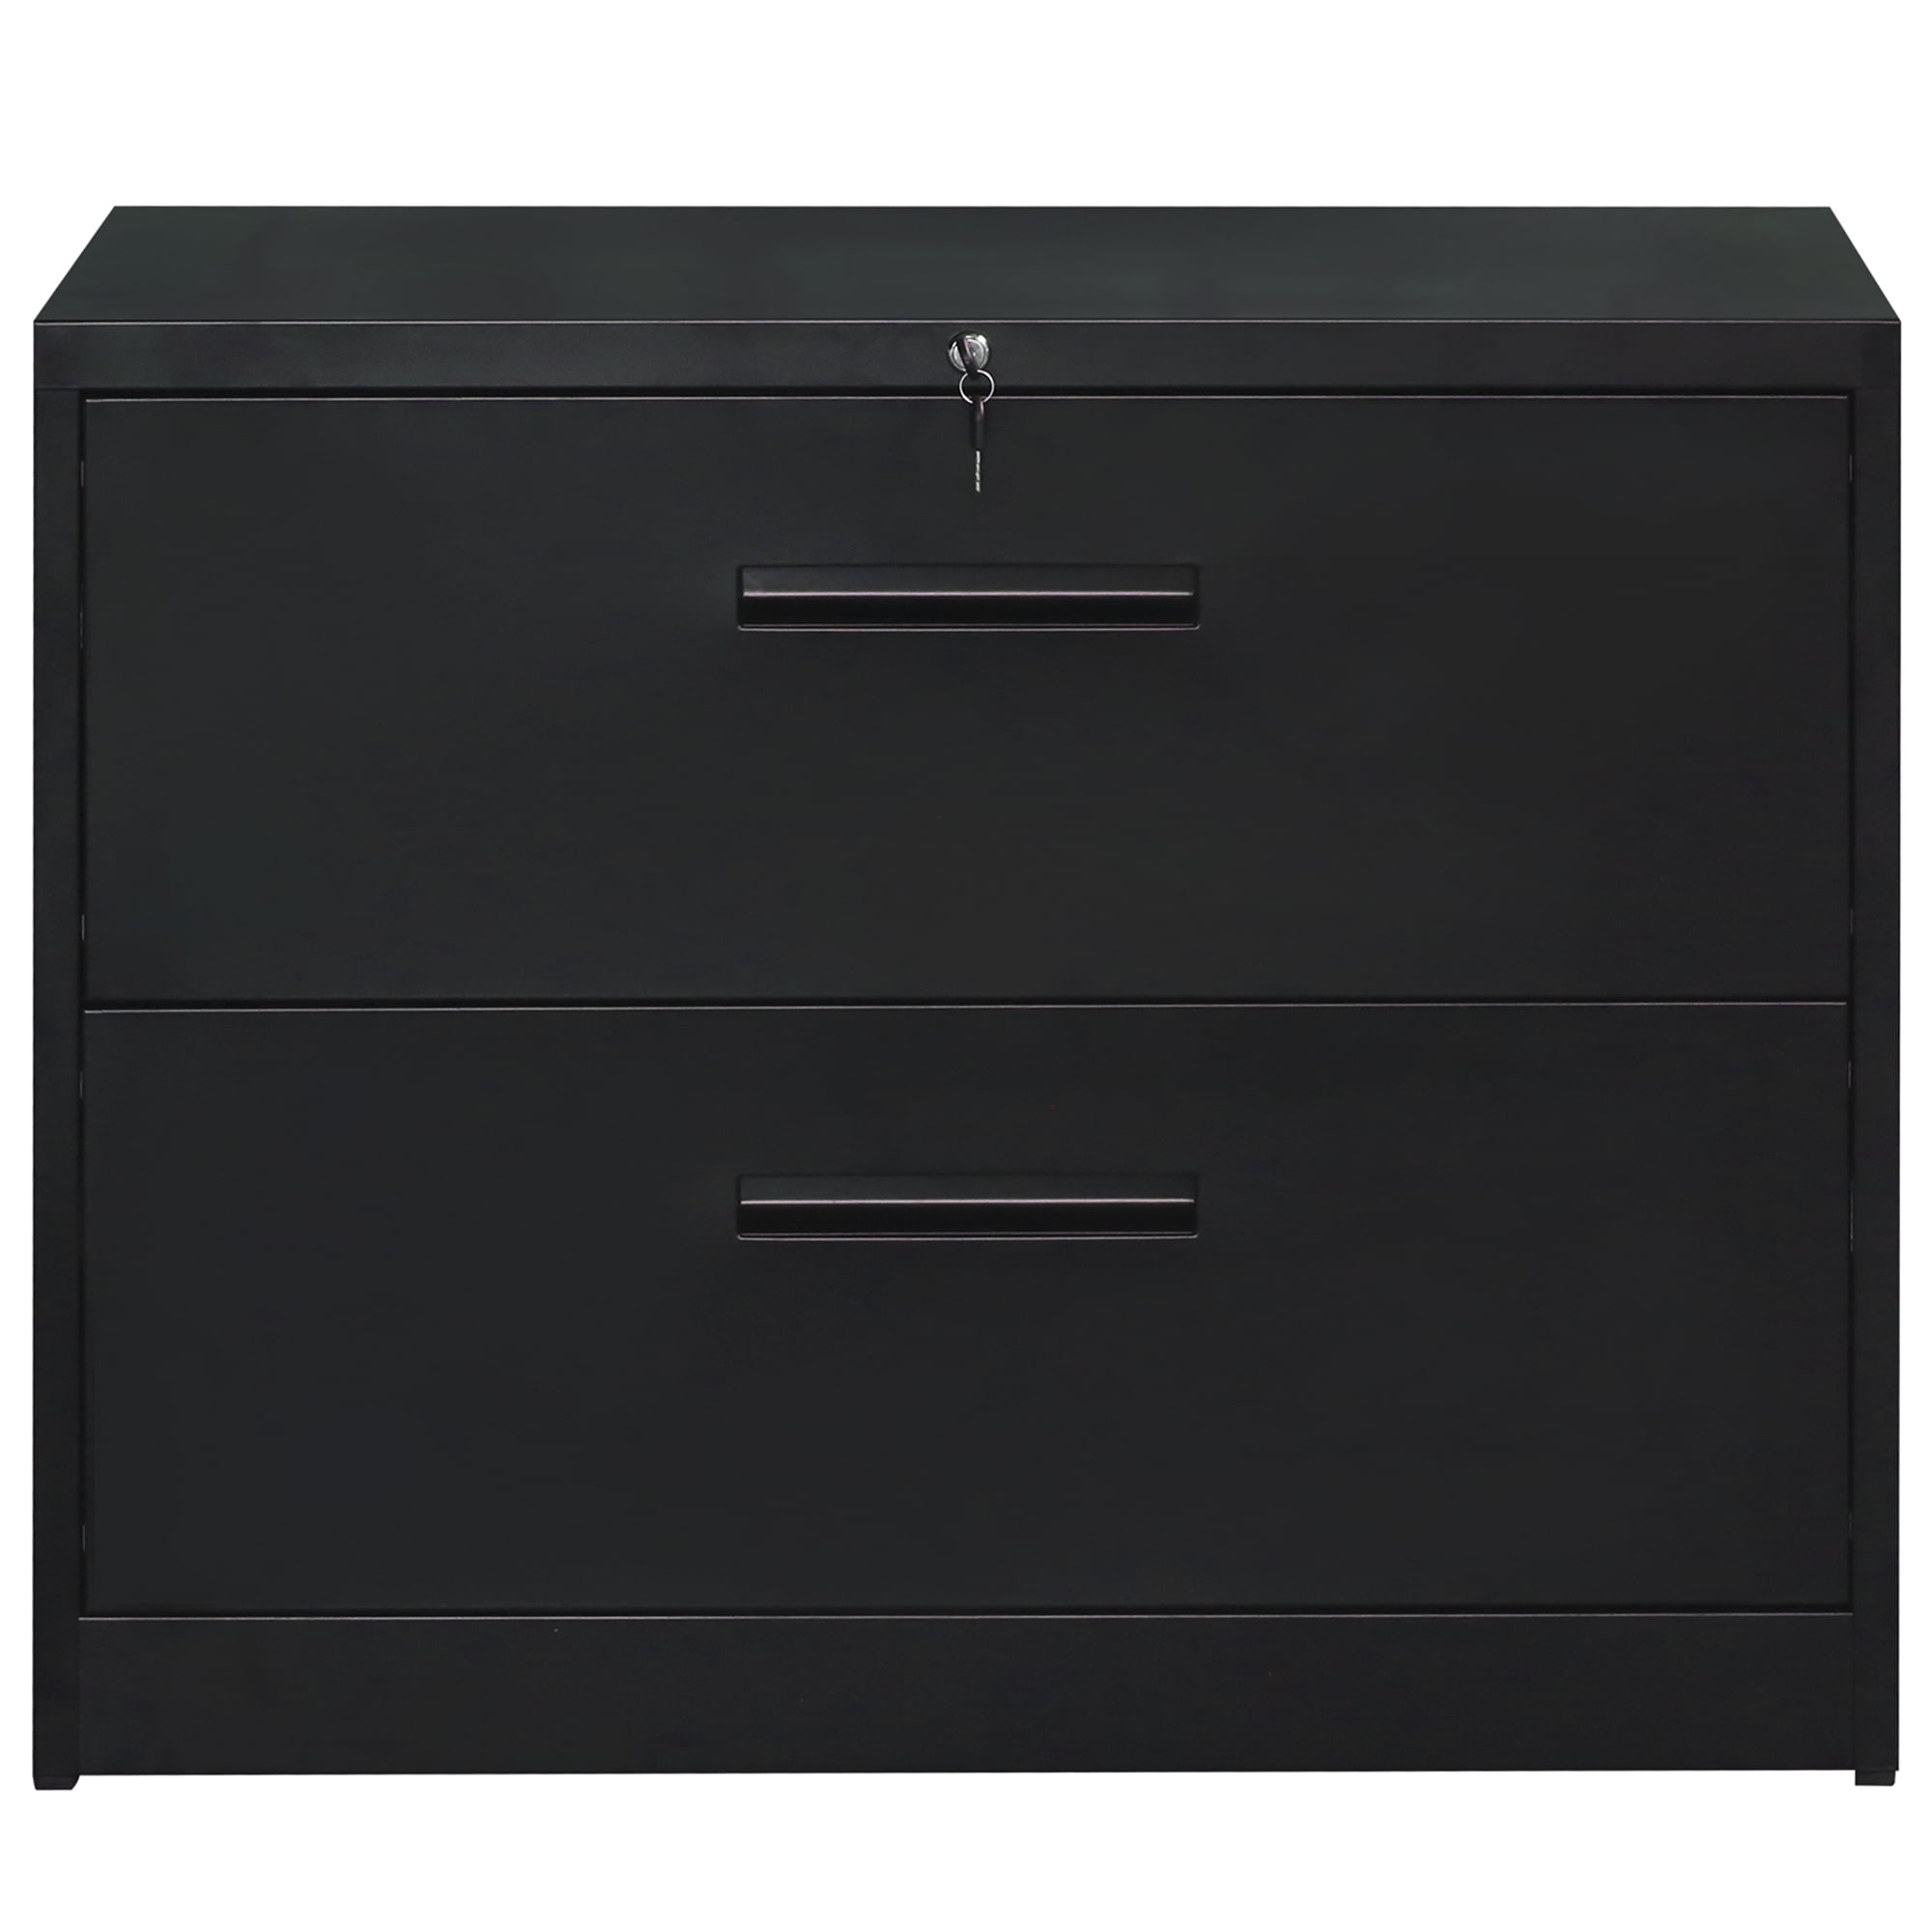 Clearance 2 Drawer File Cabinet Modern Lateral Filing Cabinets